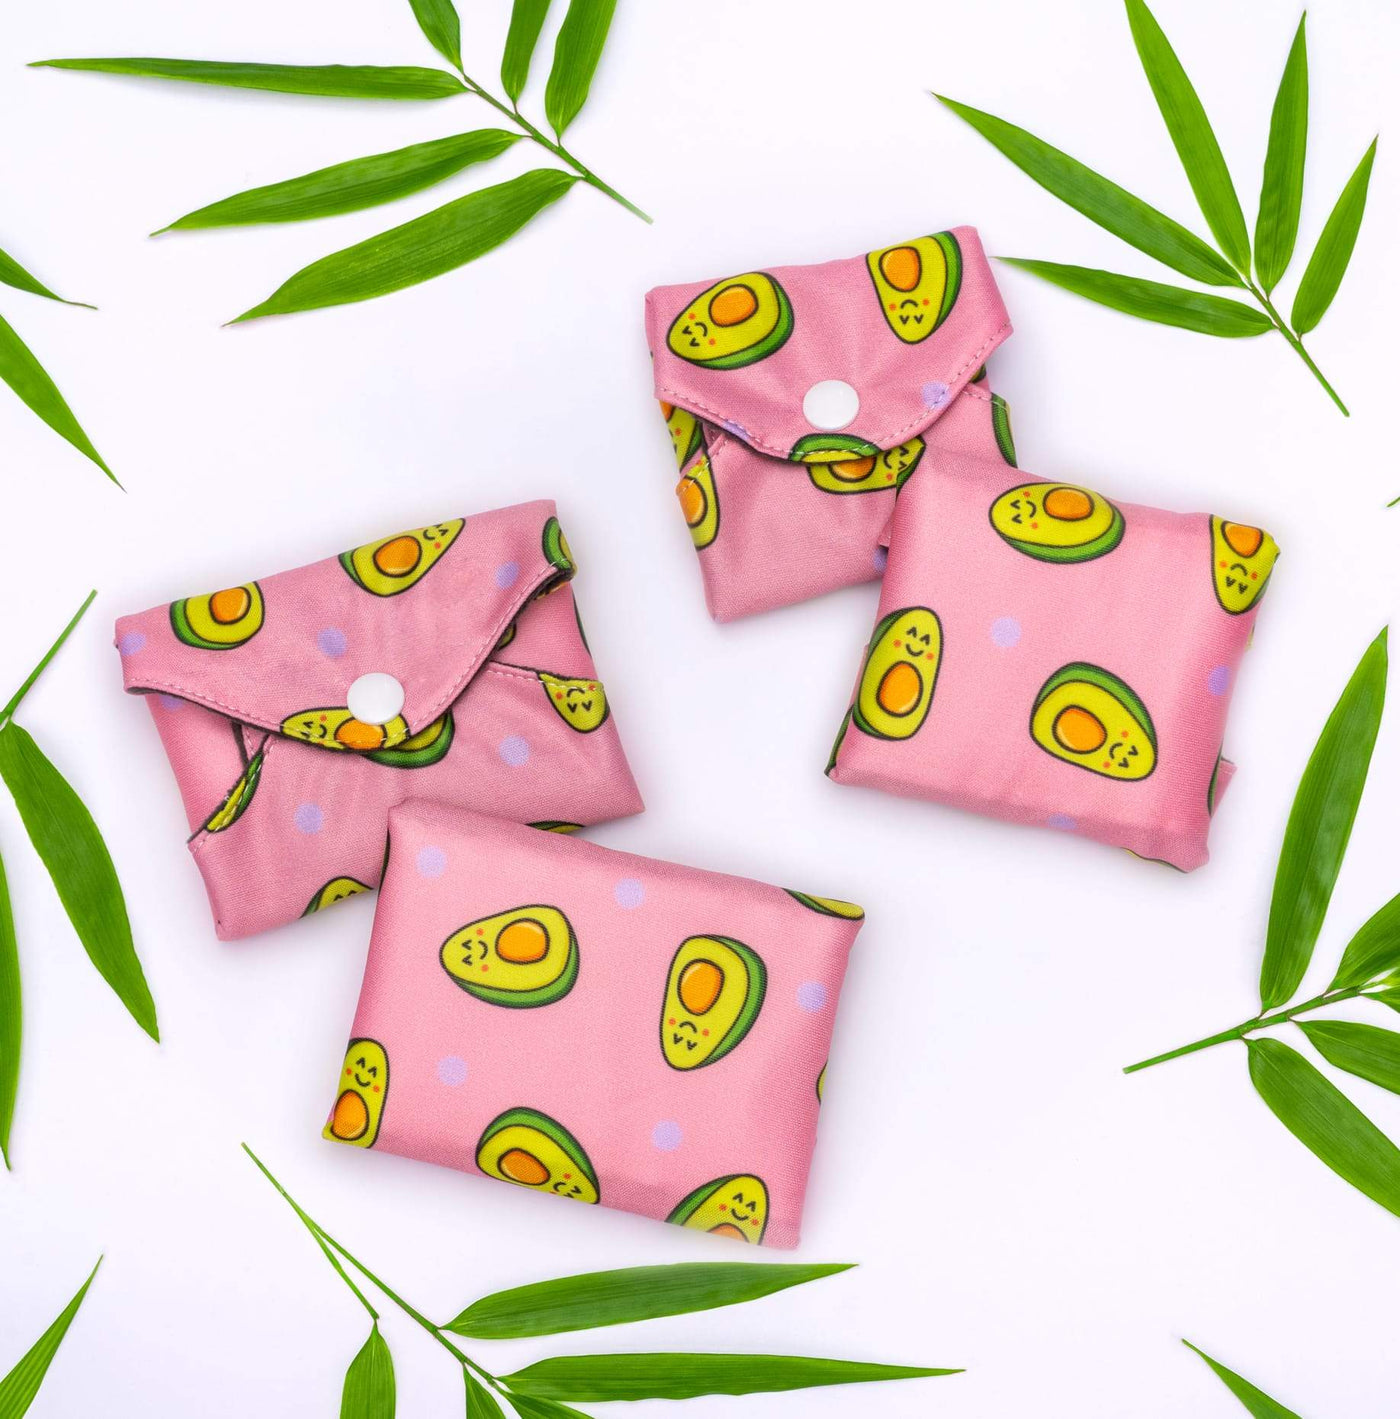 LillyPad™ Reusable Menstrual Pads Limited Edition